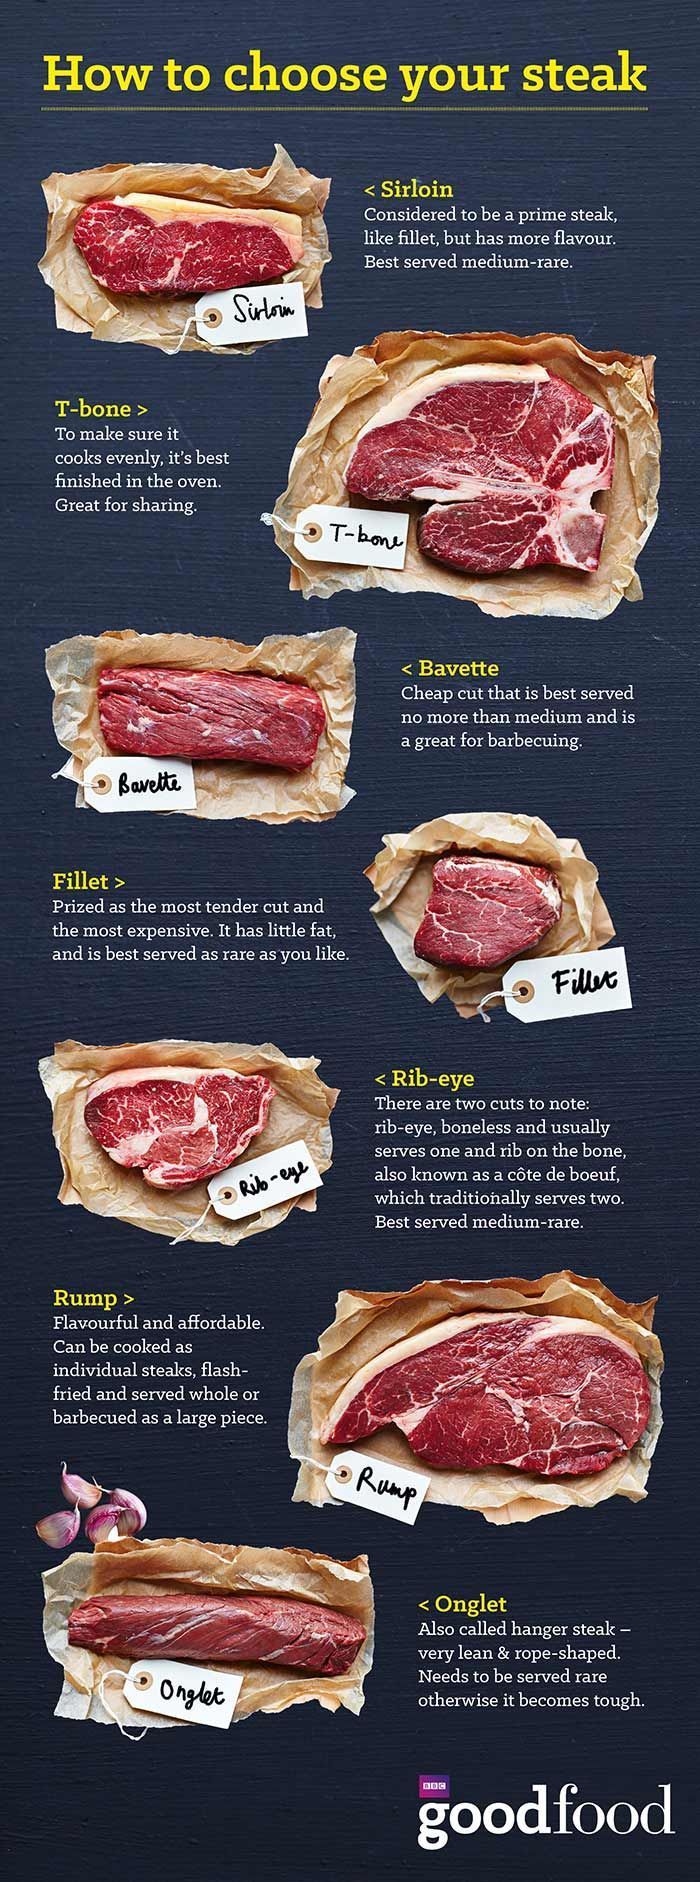 How to choose your steak